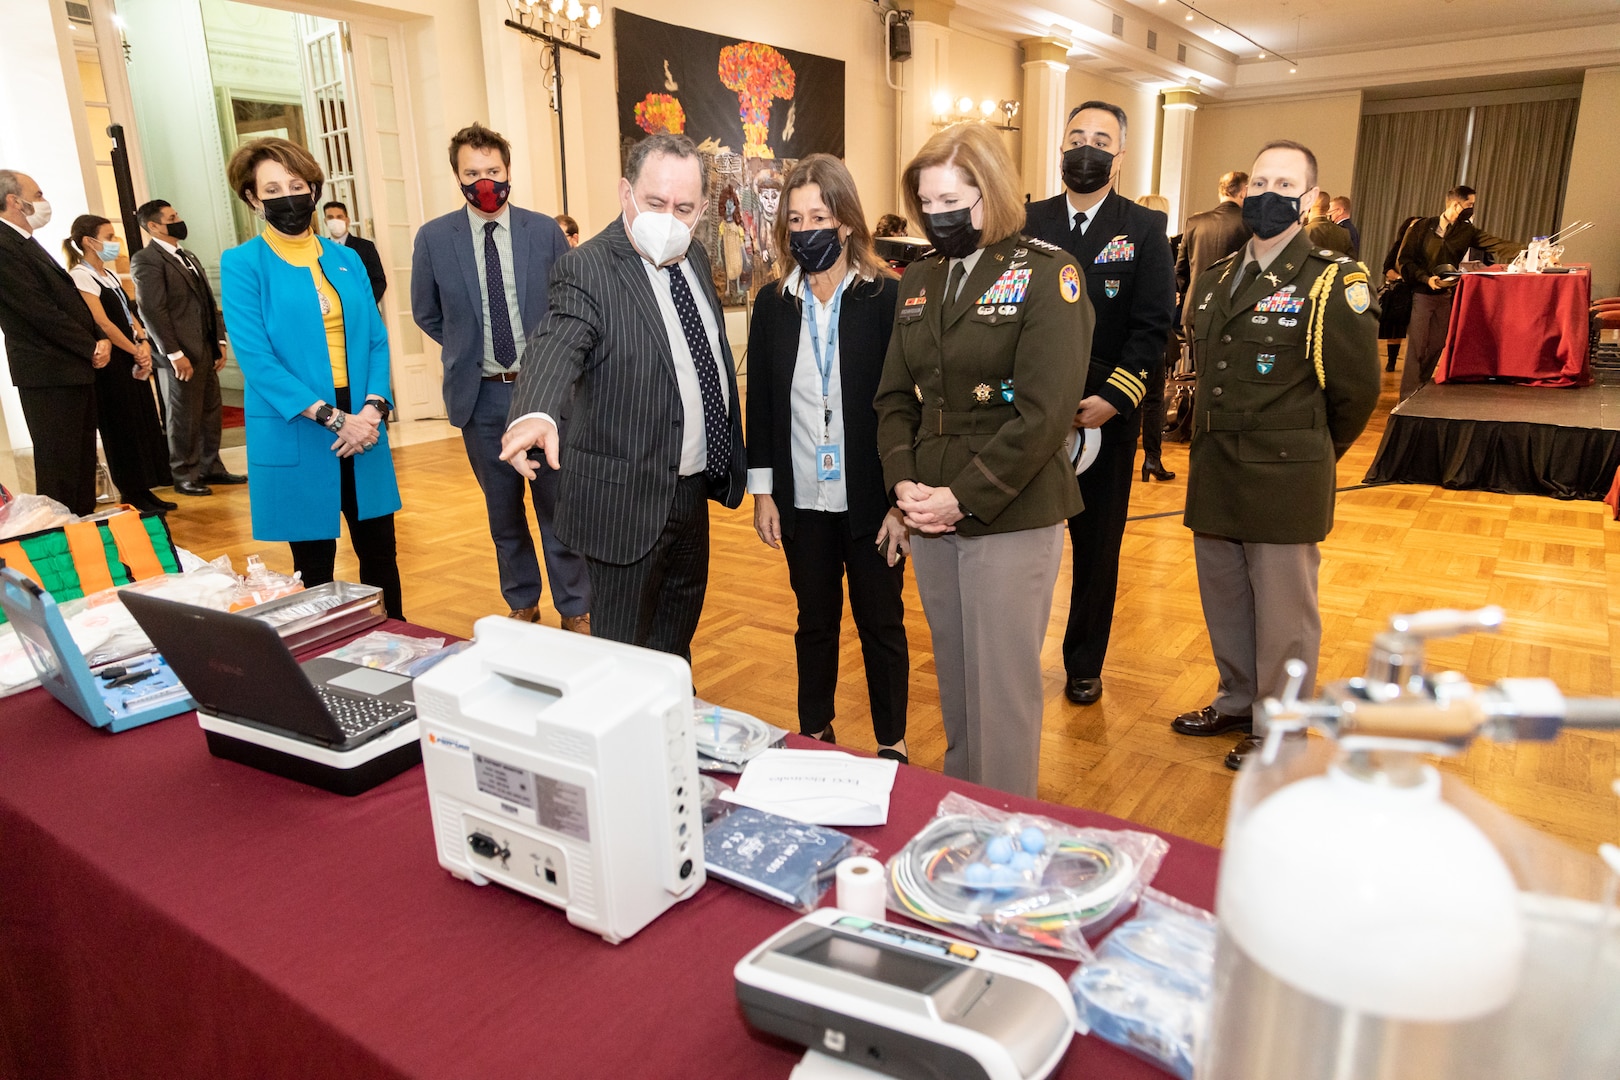 The commander of U.S. Southern Command, Army Gen. Laura Richardson, is shown medical equipment that was donated by the United States to the Argentine humanitarian agency, the White Helmets.